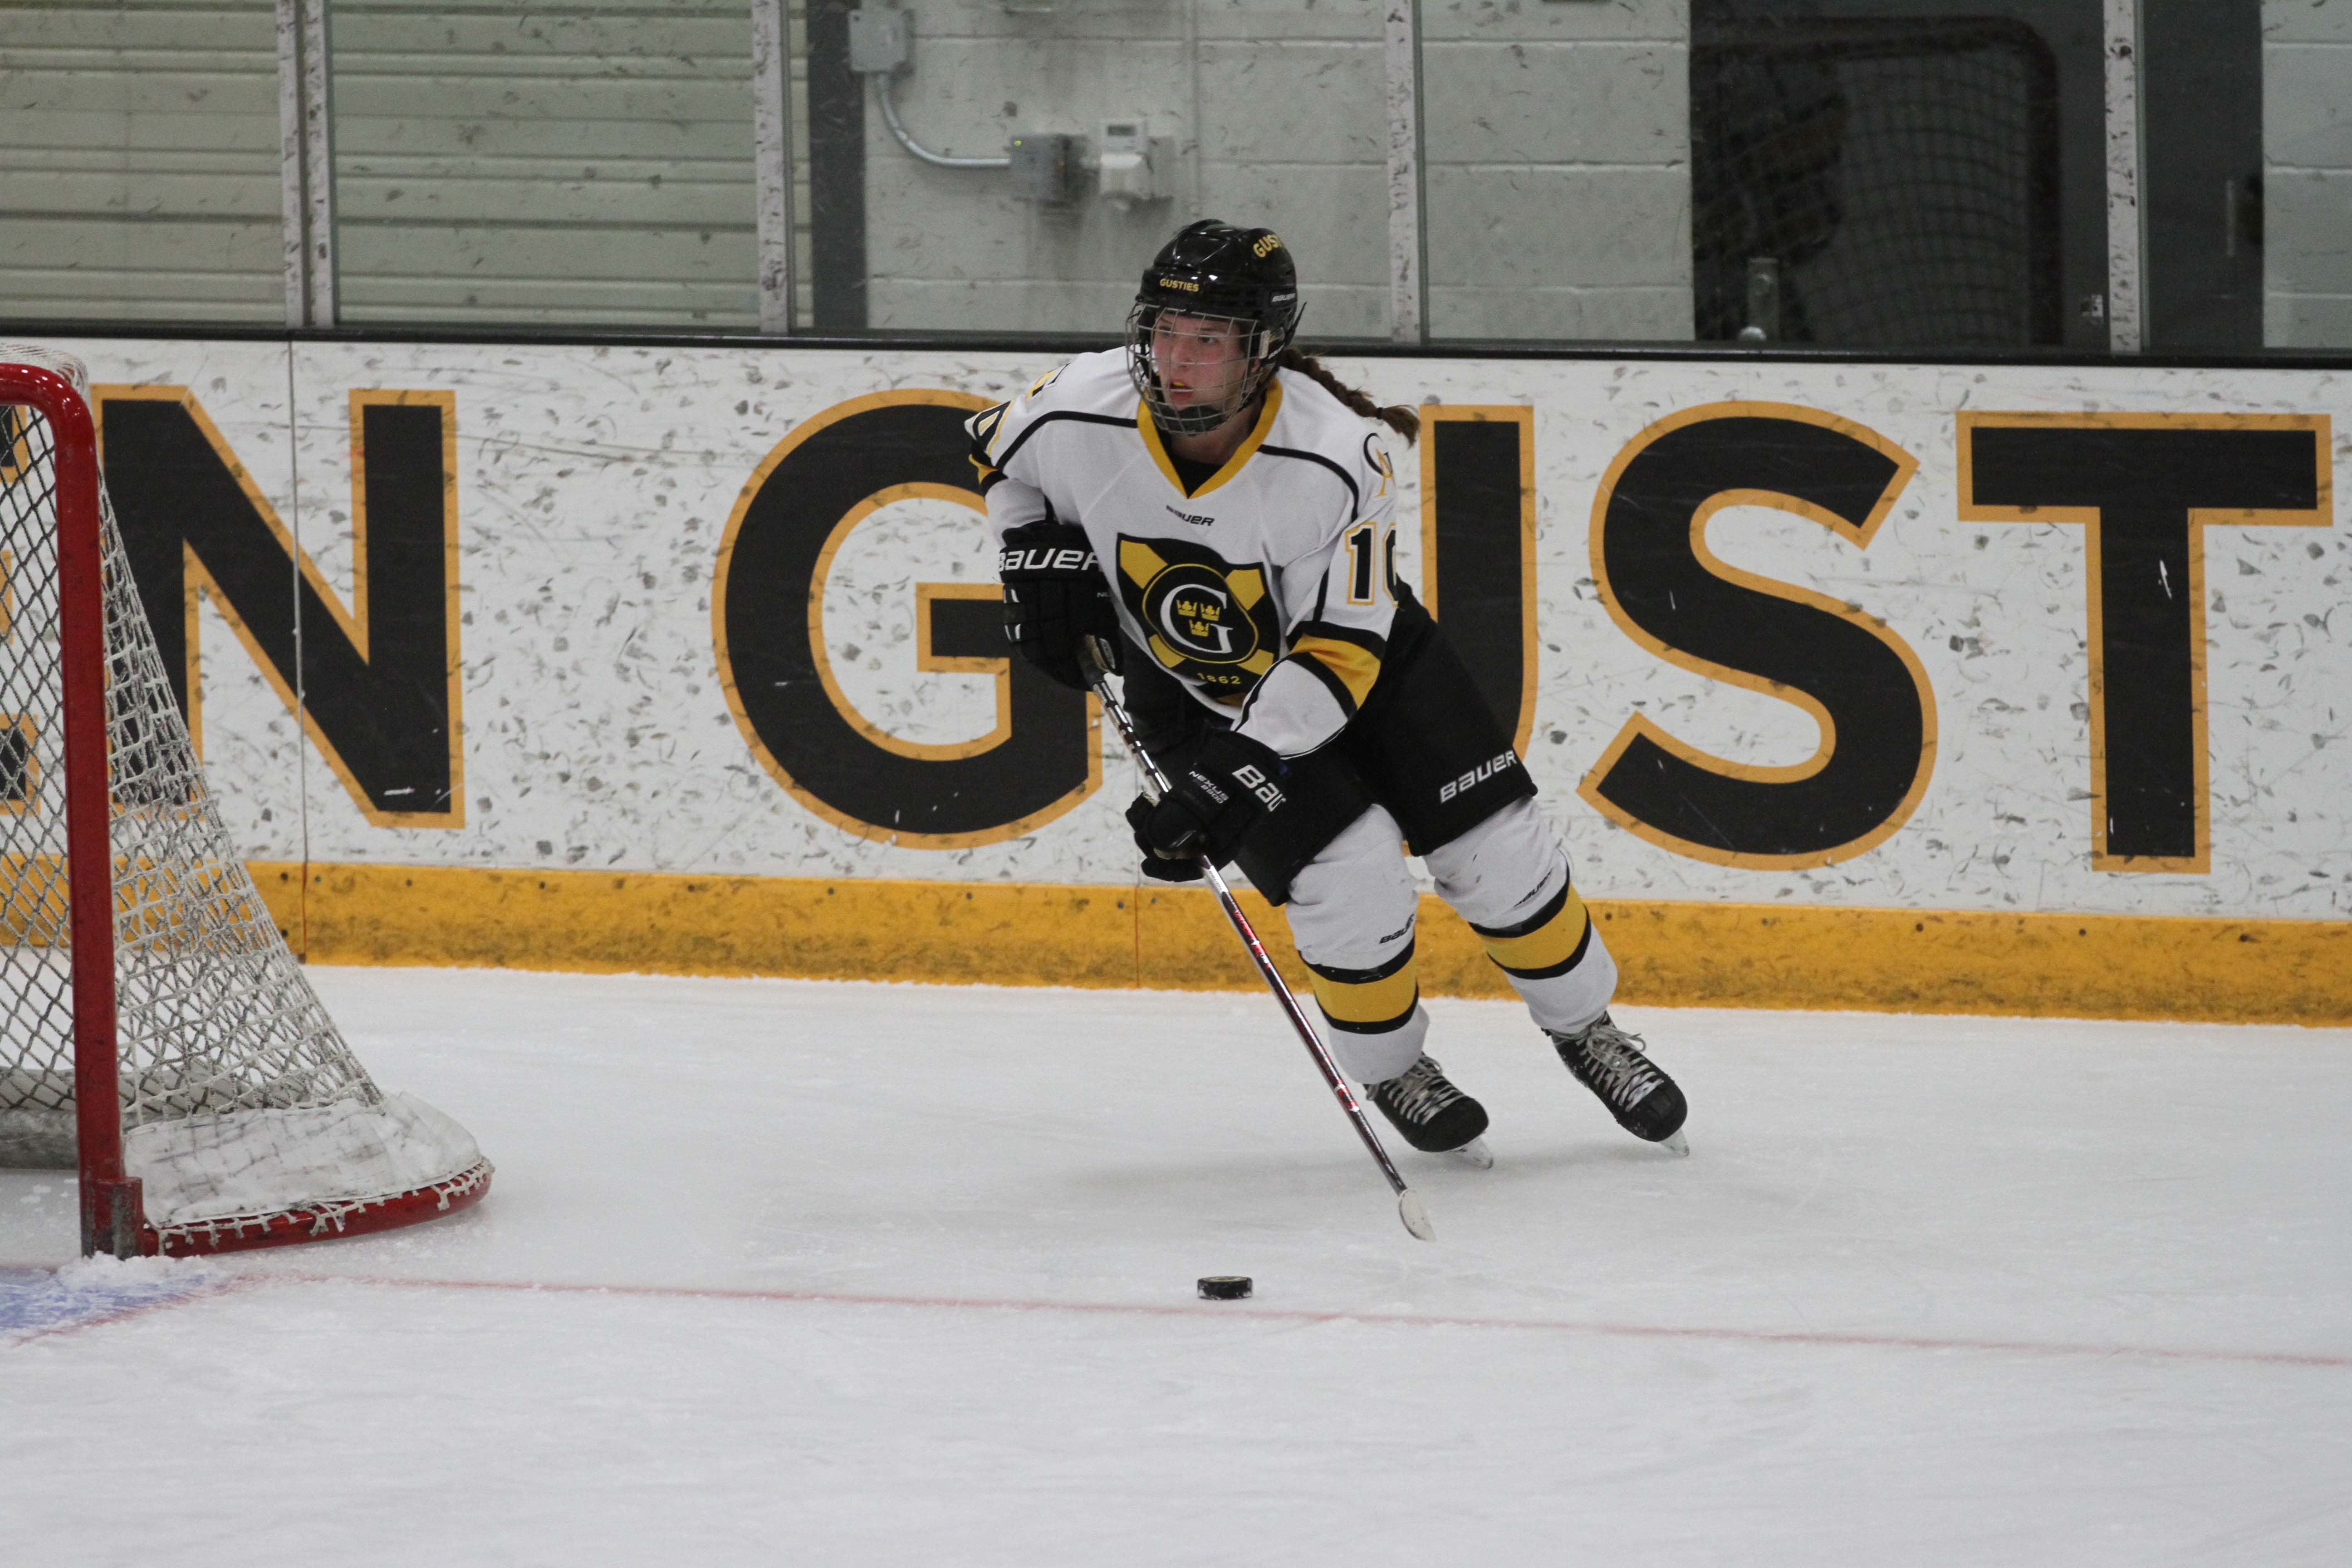 First-year Kayla Vrieze carrries the puck up the ice for the Gusties in a game earlier this season. Vrieze was a first-year standout and named to the MIAC All-Rookie Team this season.